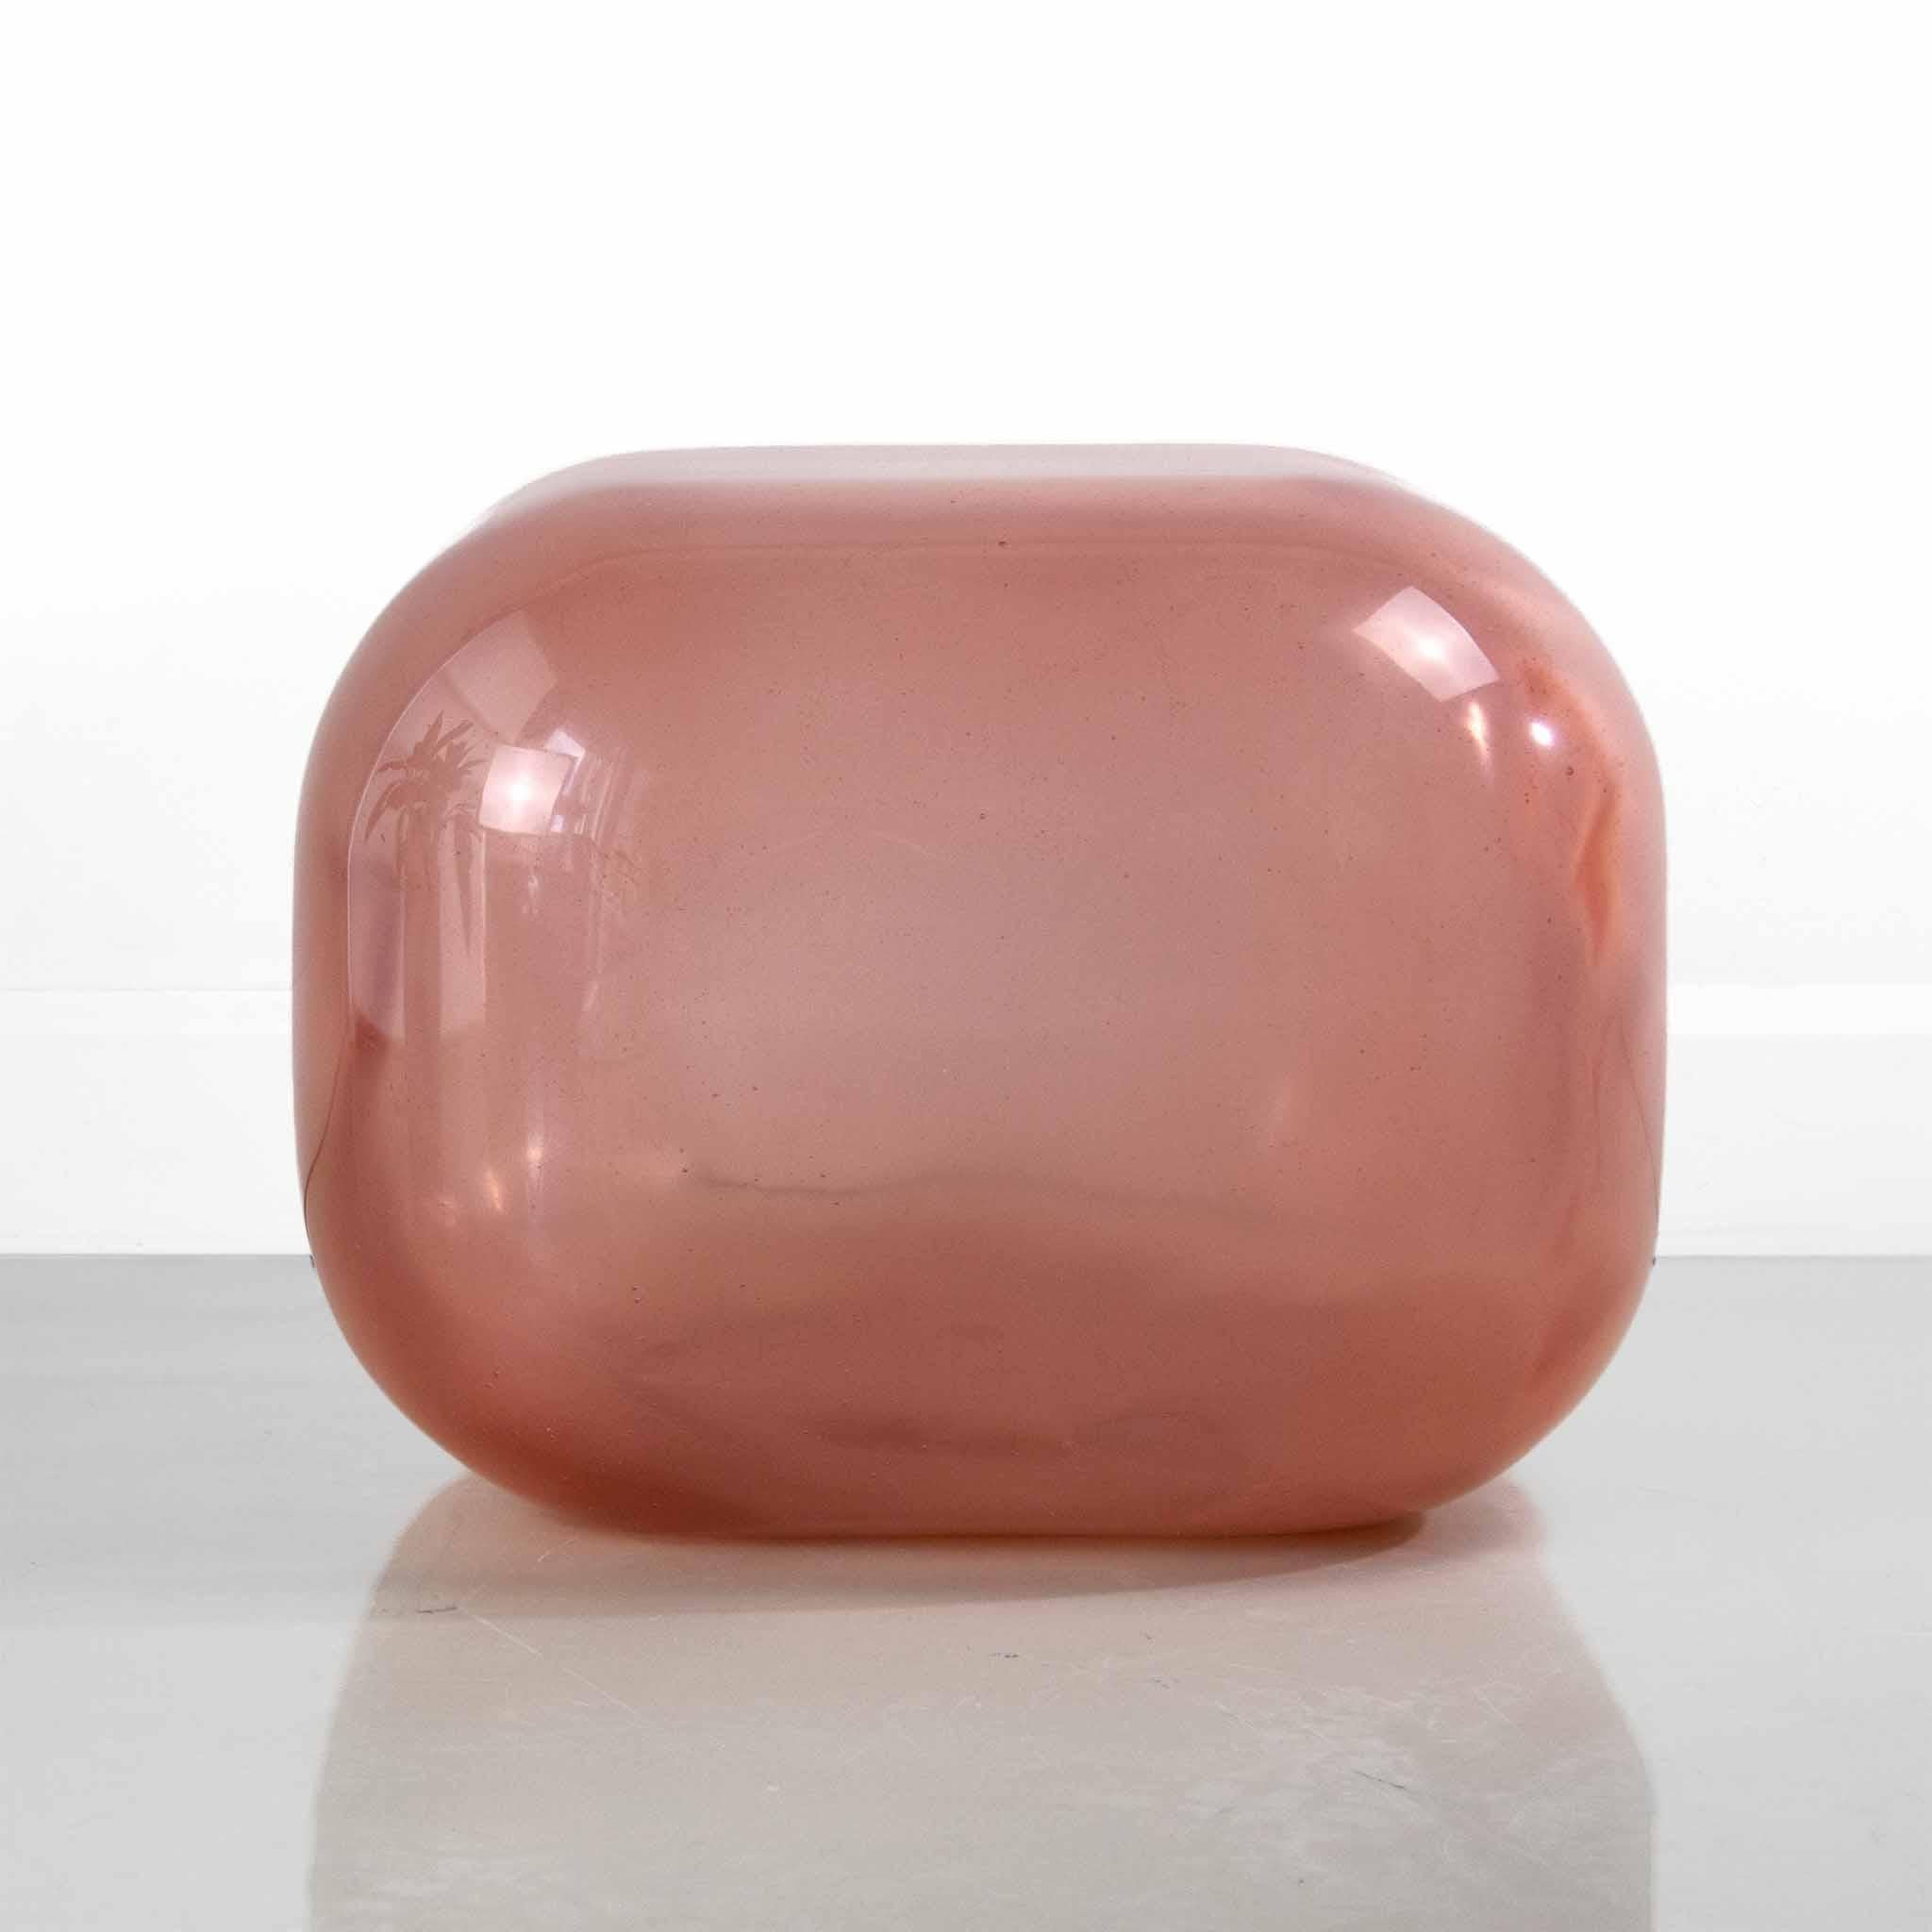 Coral Spice Oort Resin side table by creators of objects.
Materials: Resin, pigment
DImensions: W 51 x D 51 x H 40 cm
Also Available: Tourmaline, Bordeaux, Spice, Ochre, Forest, Ocean, Twilight, Rock, Lilac, Cerise, Coral Spice, Honey, Moss,